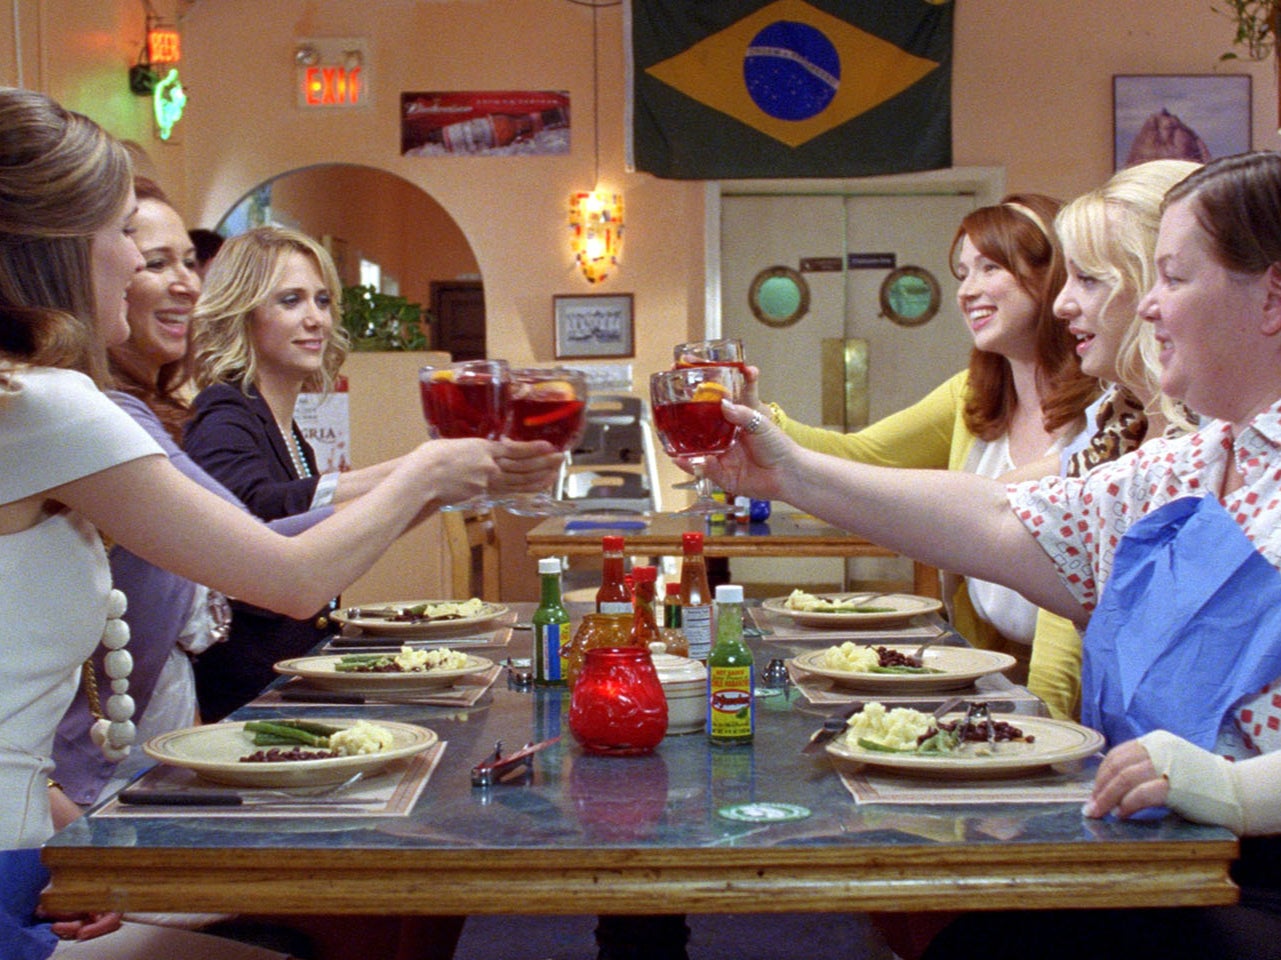 In the 2011 comedy movie ‘Bridesmaids’, pre-wedding activities devolve into drunken spectacles and defecating in the street